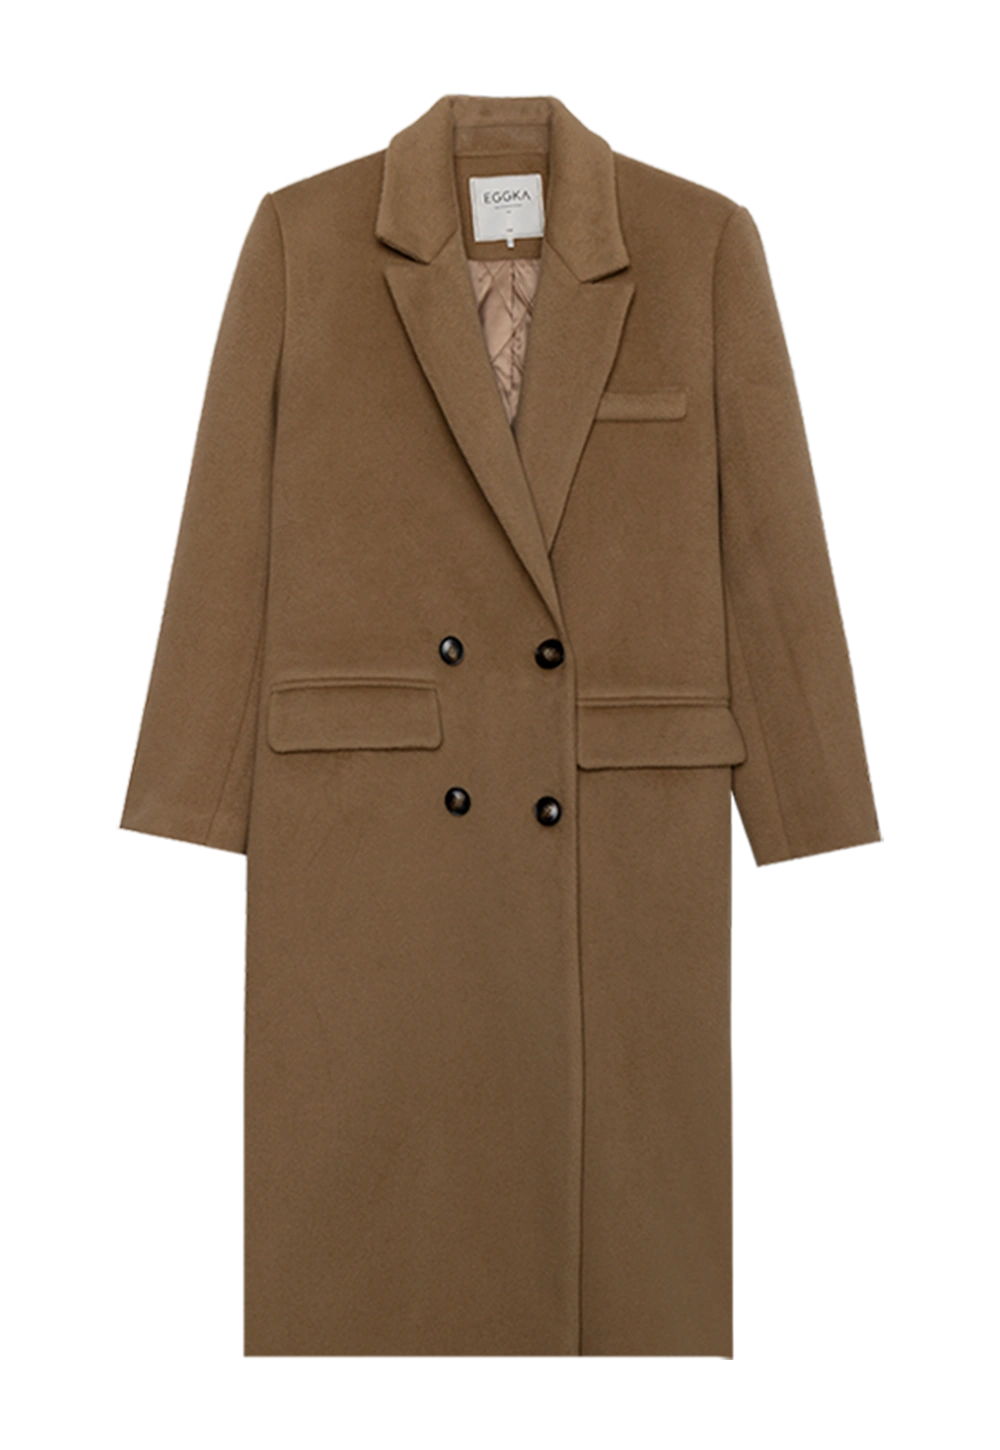 Women's Brown Double-Breasted Long Coat with Notched Lapel and Front Pockets